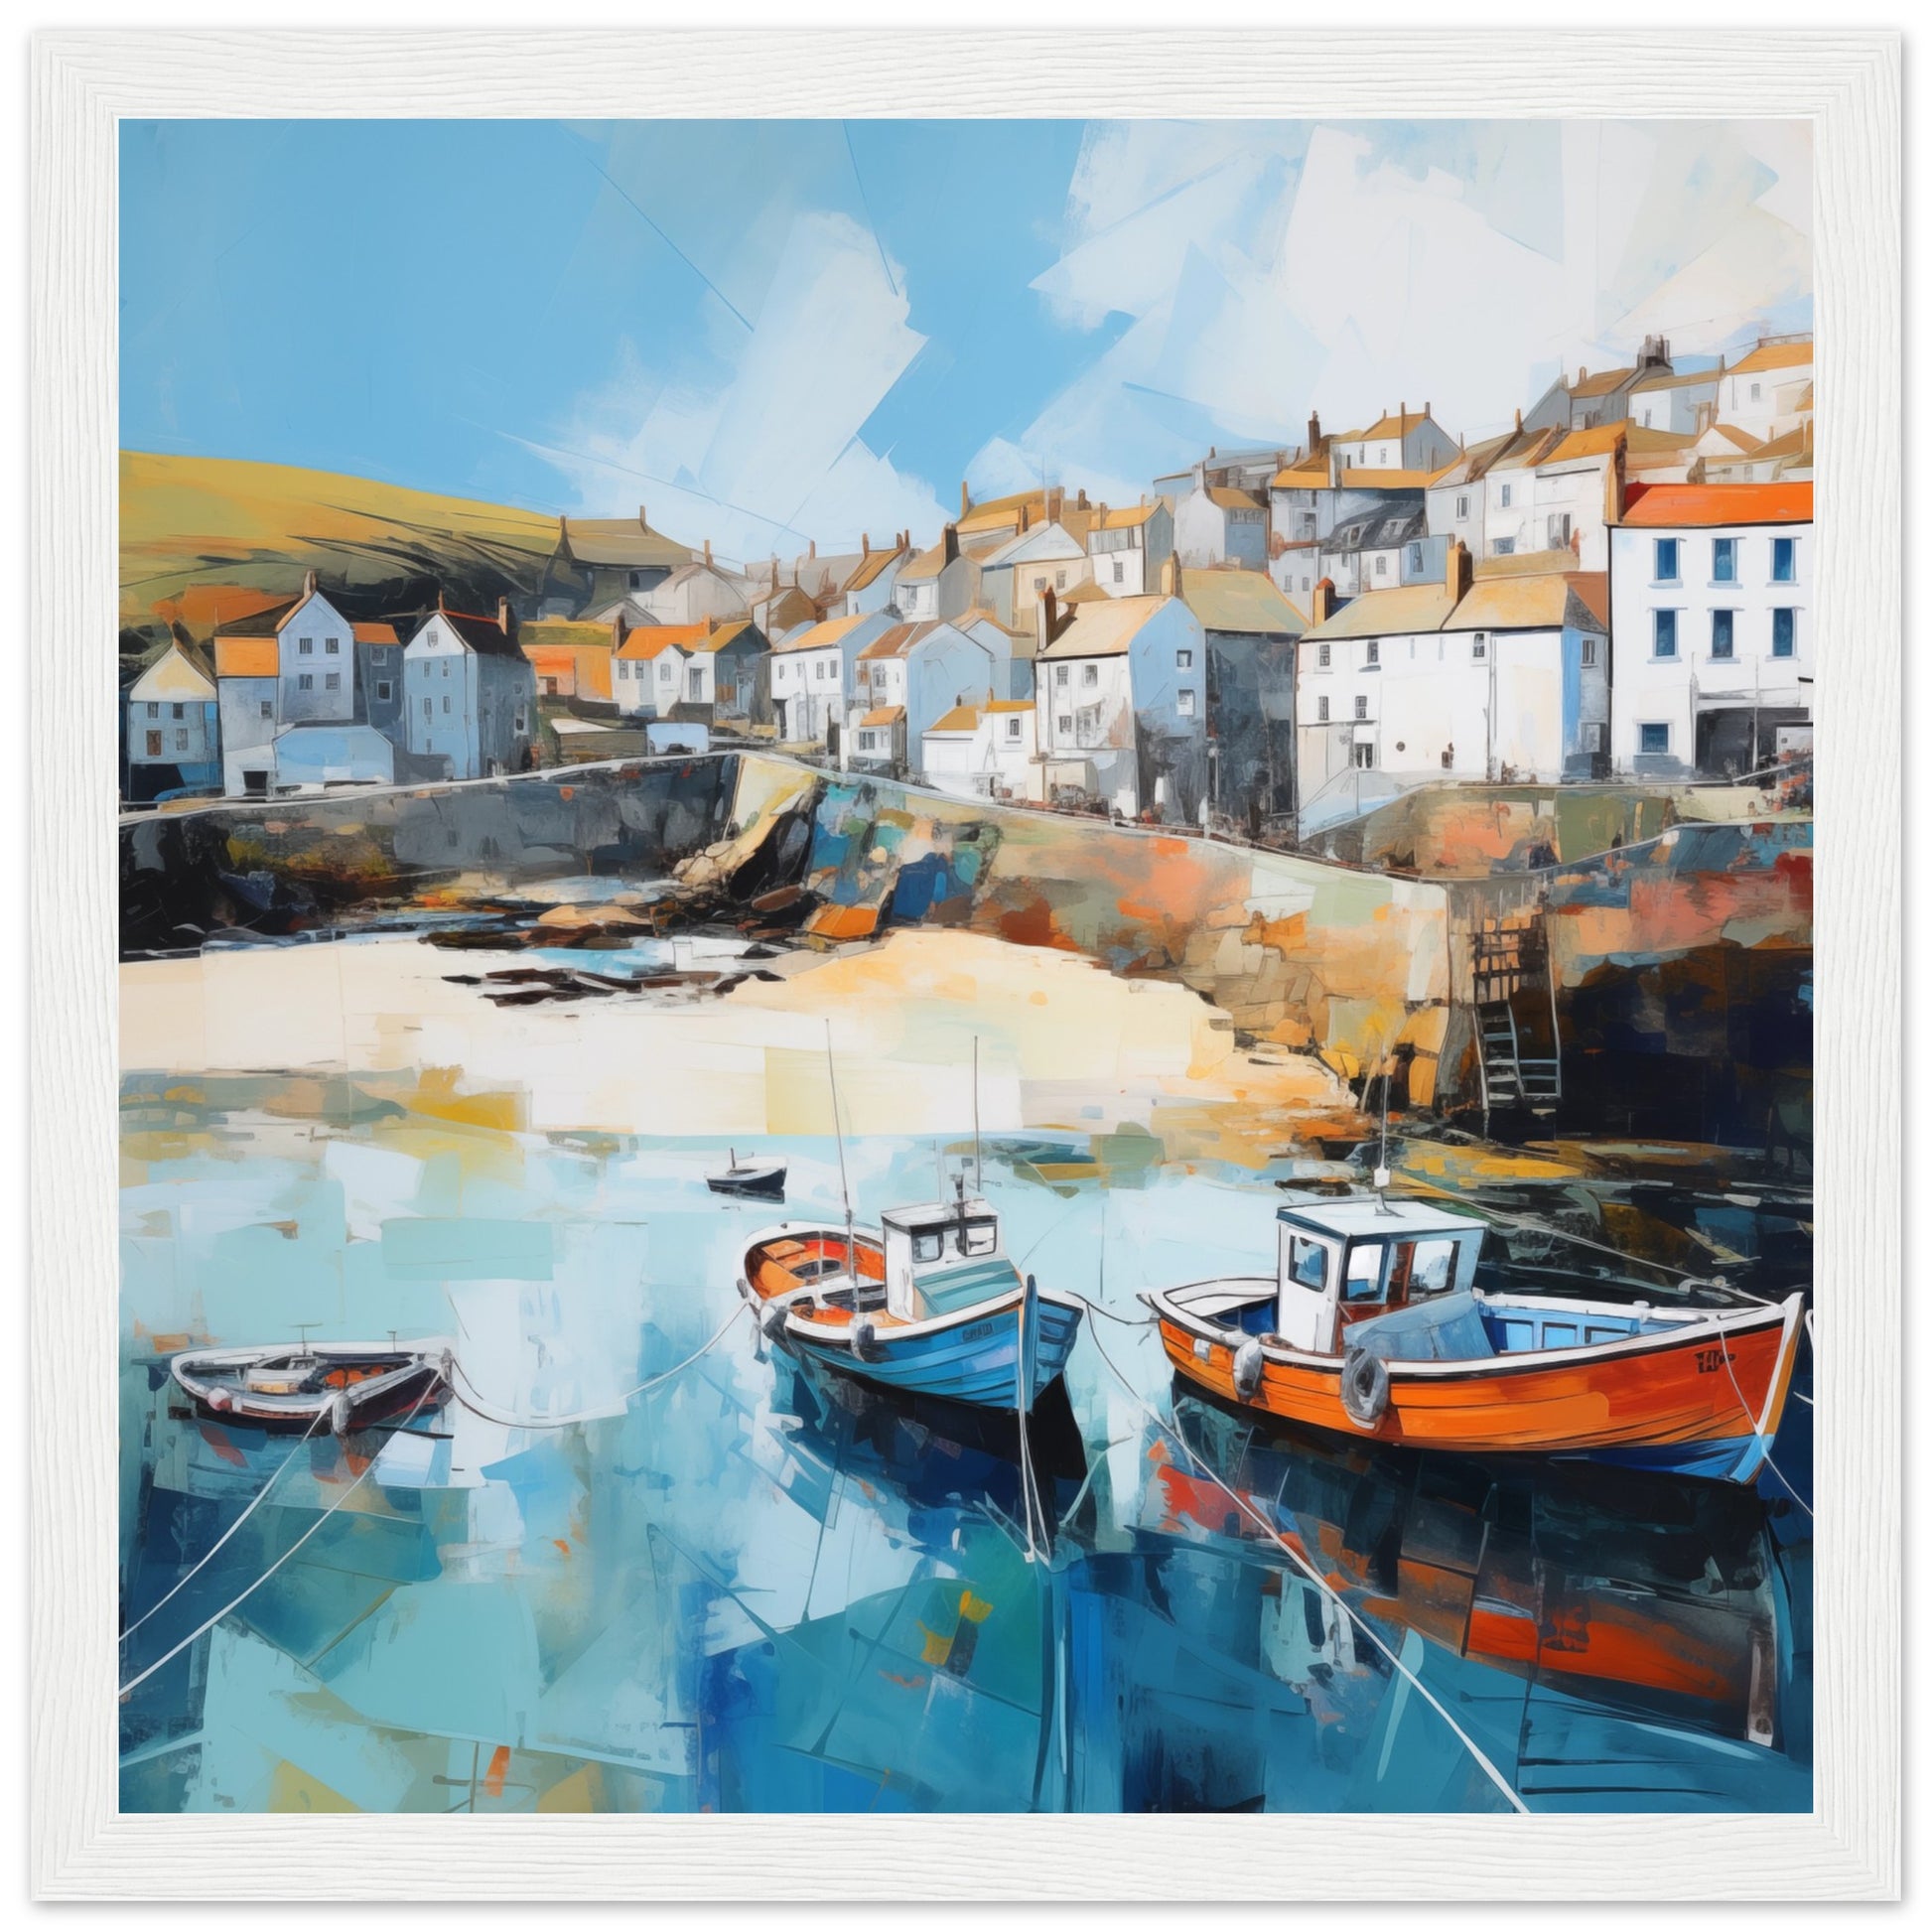 Port Isaac Large Art Prints - Print Room Ltd No frame (Please select for print only) 70x70 cm / 28x28"